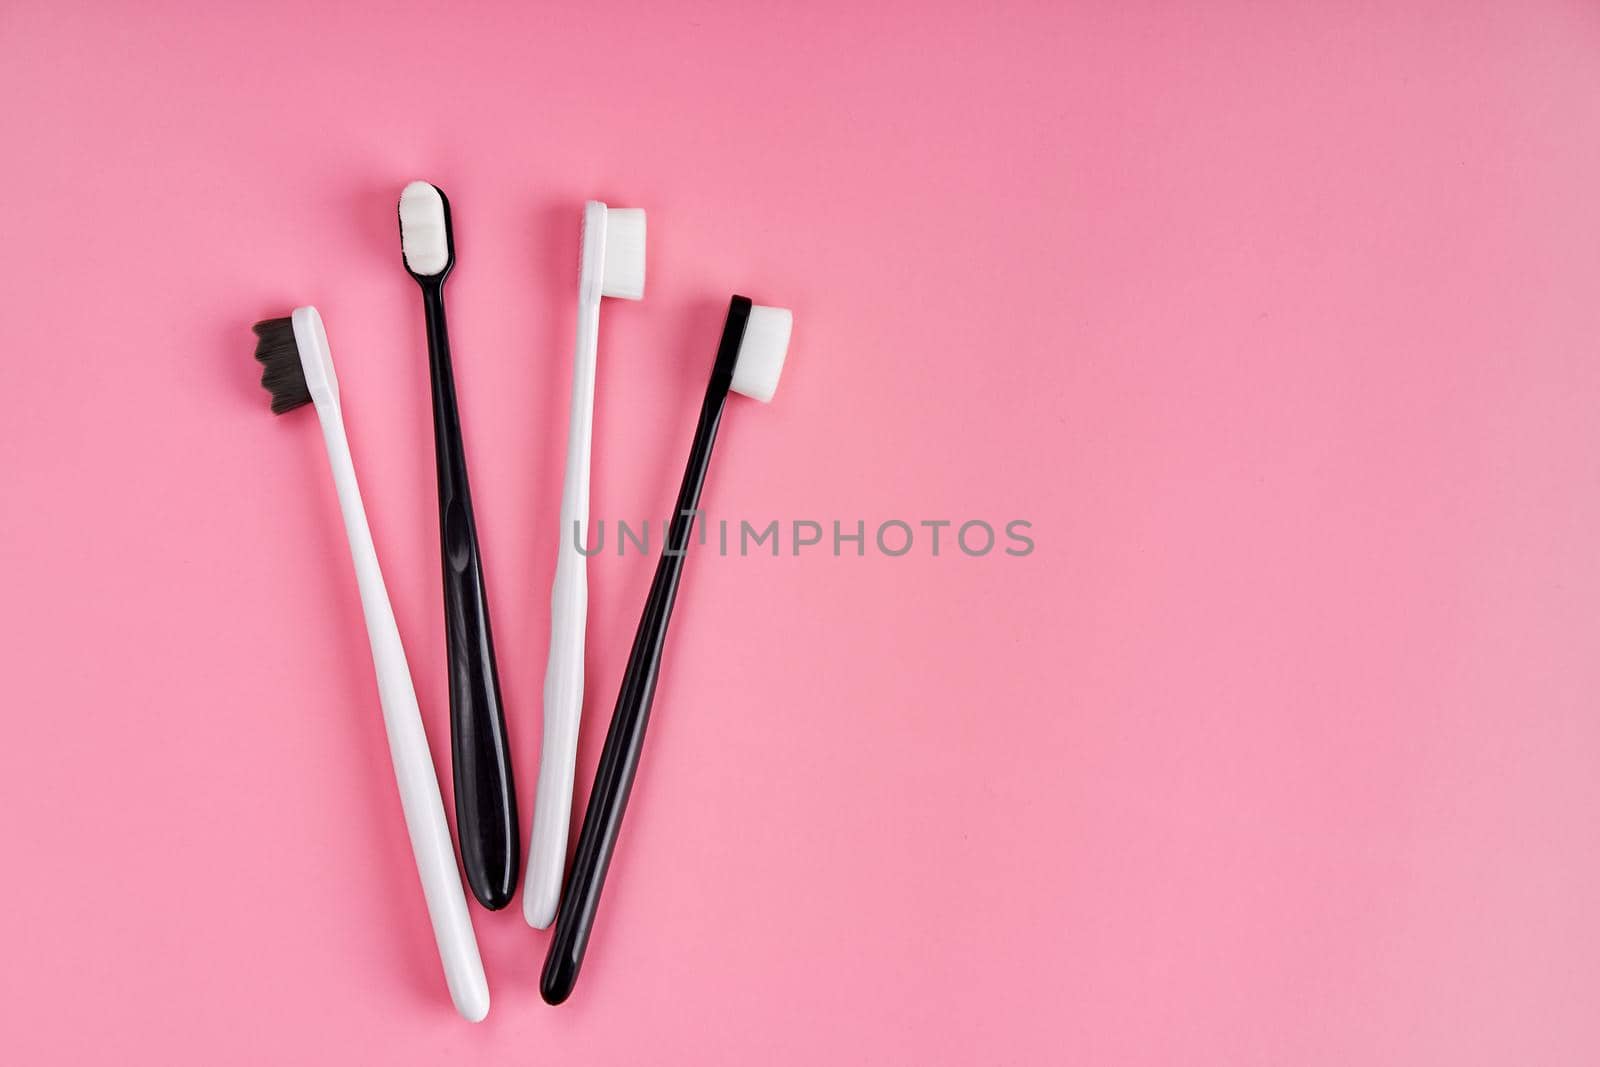 Fashionable toothbrush with soft bristles. Popular toothbrushes. Hygiene trends. Kit of toothbrushes on pink background by Try_my_best